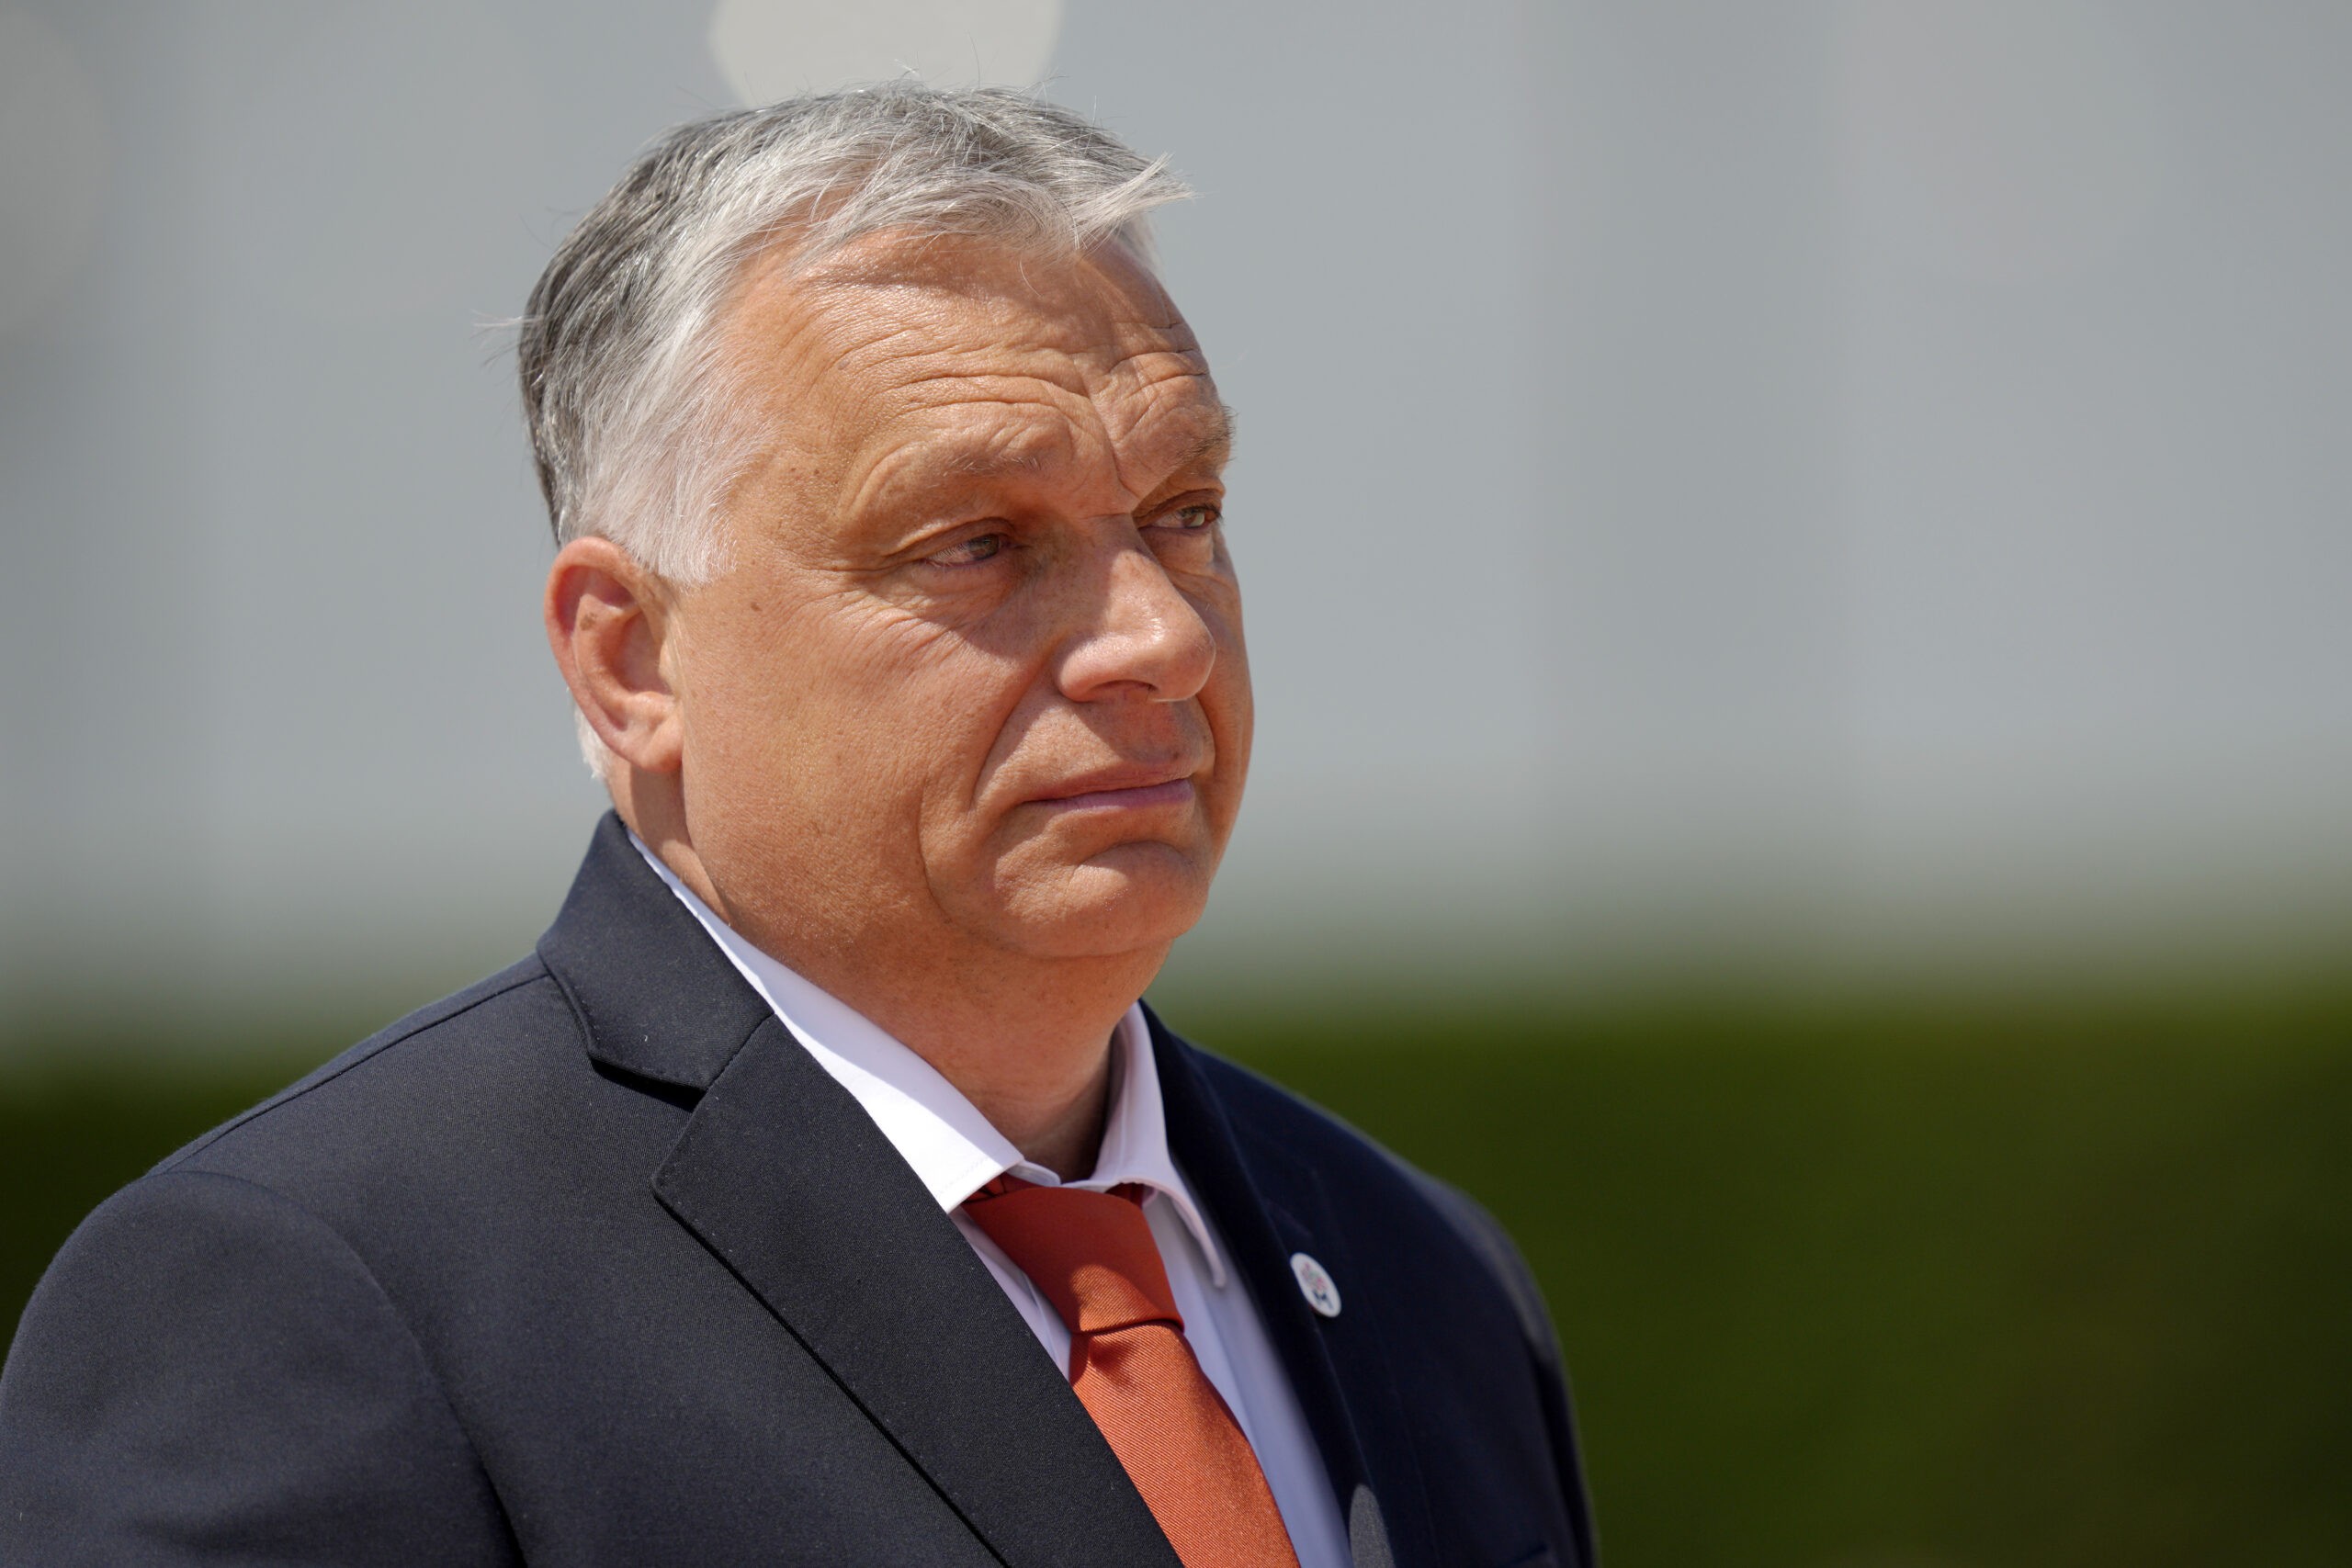 Hungary's Prime Minister Viktor Orban arrives for the European Political Community Summit at the Mimi Castle in Bulboaca, Moldova, Thursday, June 1, 2023. Leaders are meeting in Moldova Thursday for a summit aiming to show a united front in the face of Russia's war in Ukraine and underscore support for the Eastern European country's ambitions to draw closer to the West and keep Moscow at bay. (AP Photo/Vadim Ghirda)